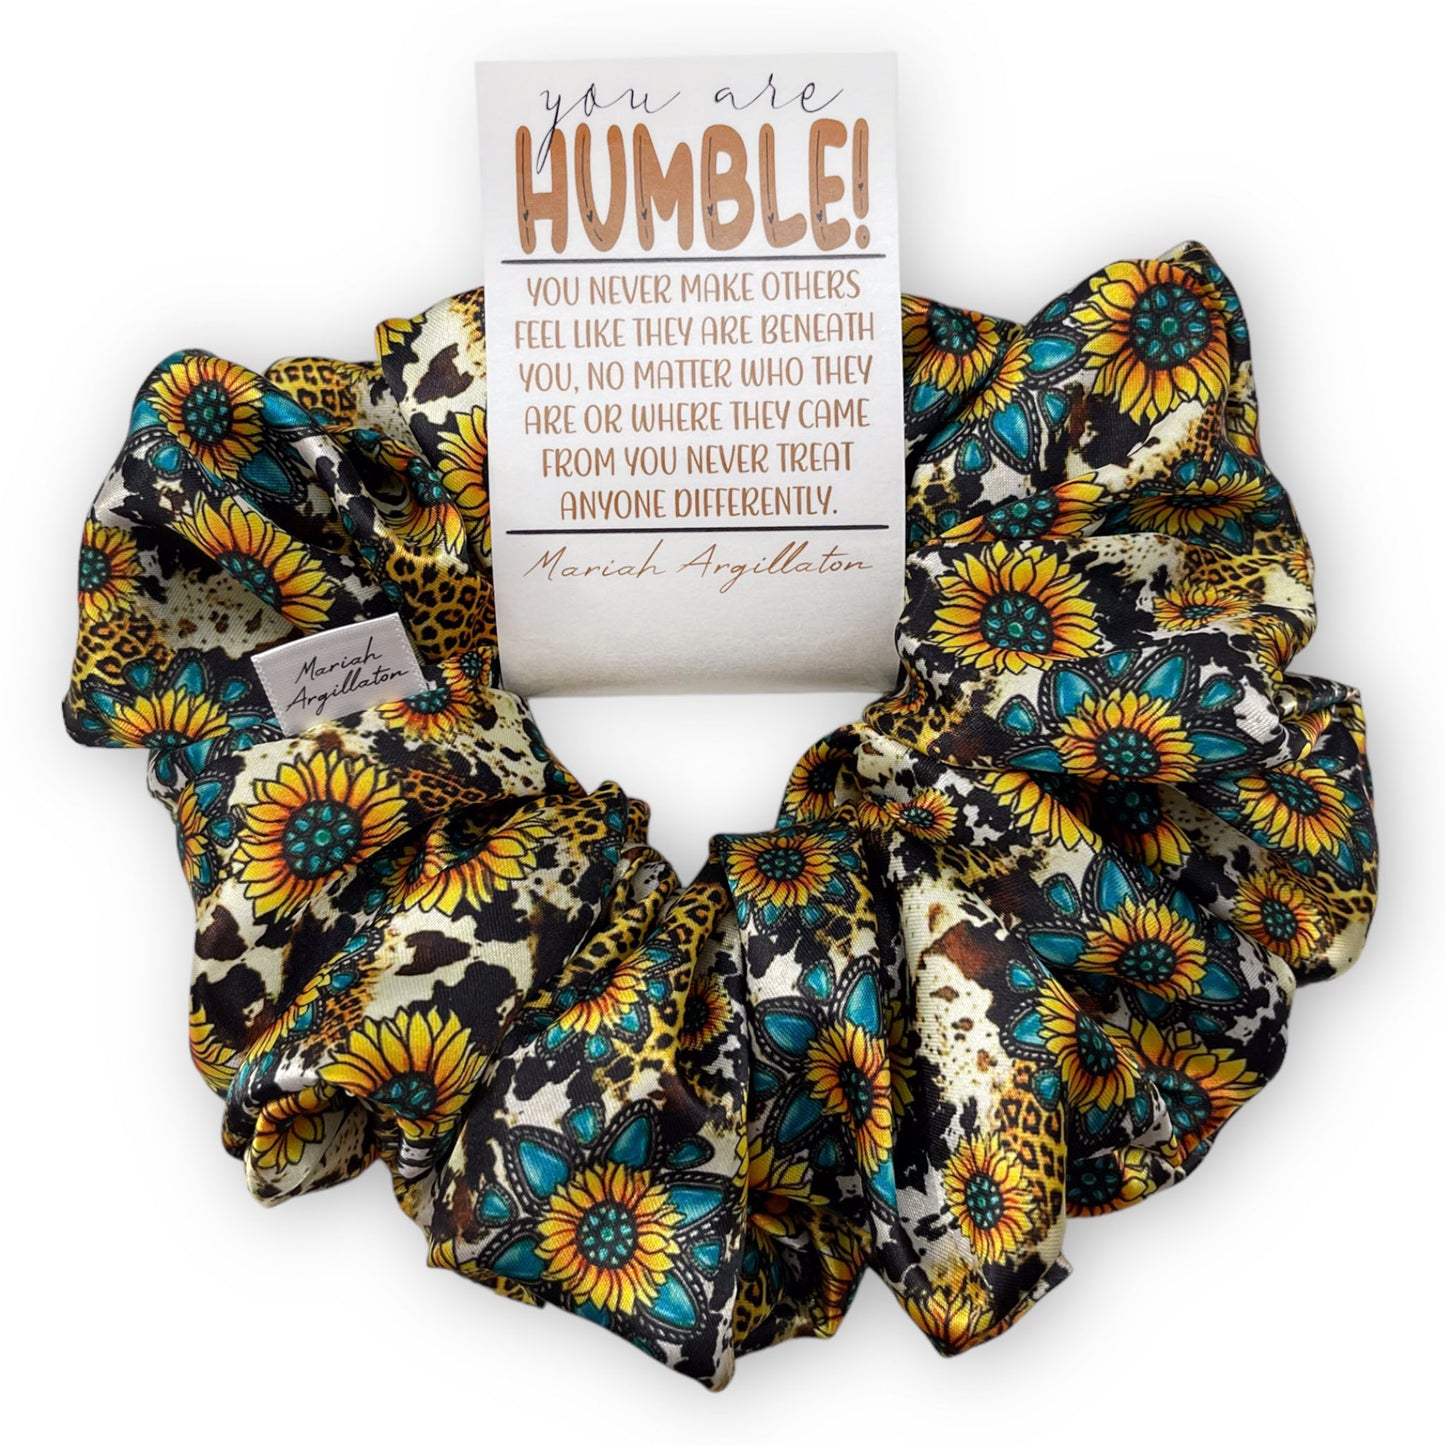 You Are Humble! XL Scrunchie!